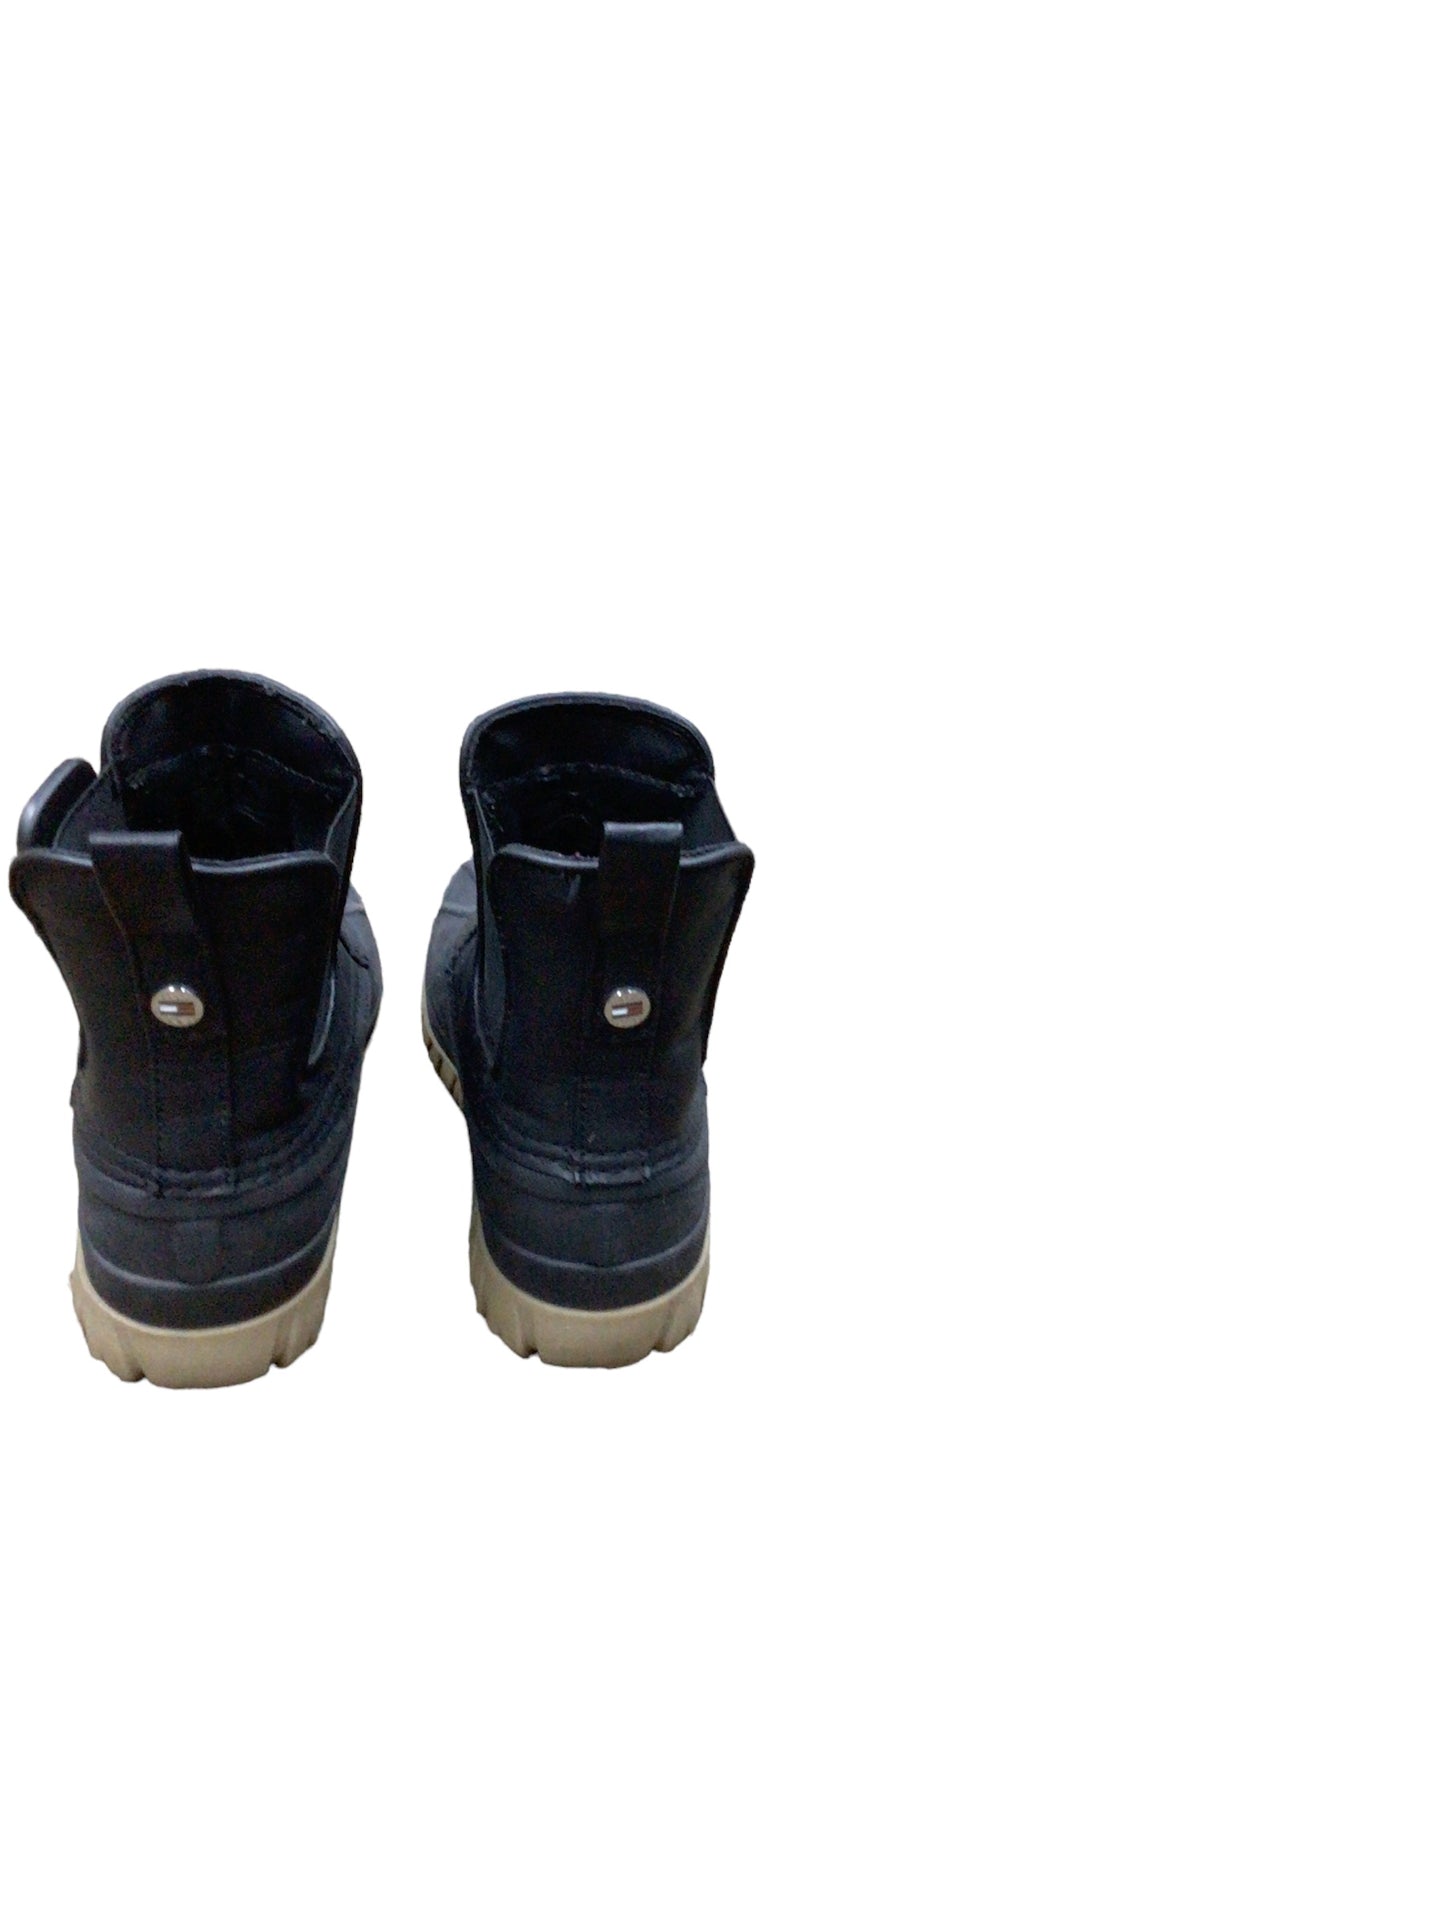 Boots Snow By Tommy Hilfiger  Size: 6